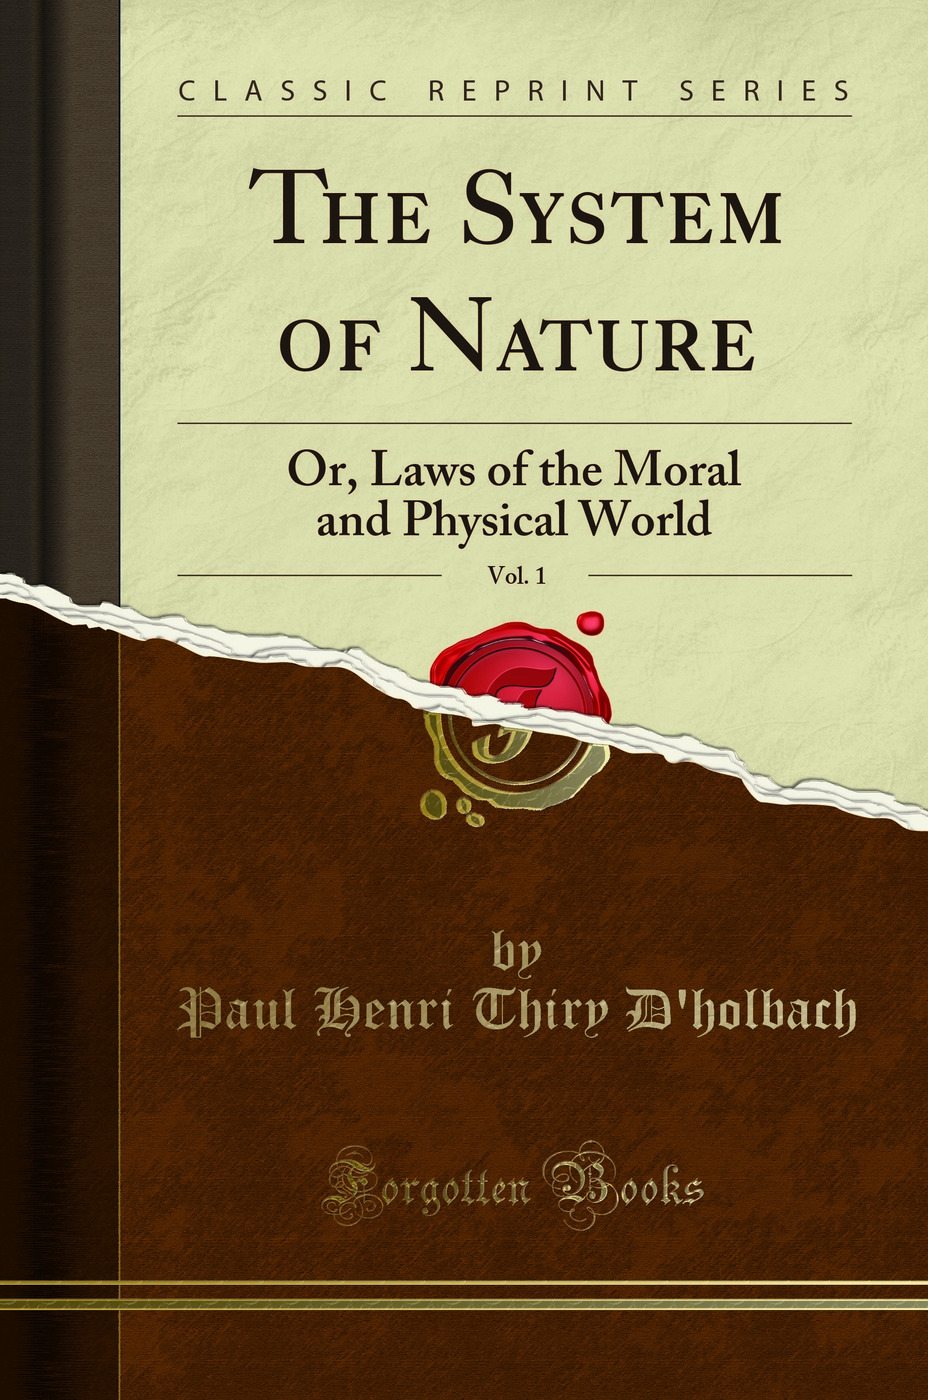 The System of Nature: Or Laws of the Moral and Physical World (Classic Reprint) - Paul Henri Thiry D'holbach